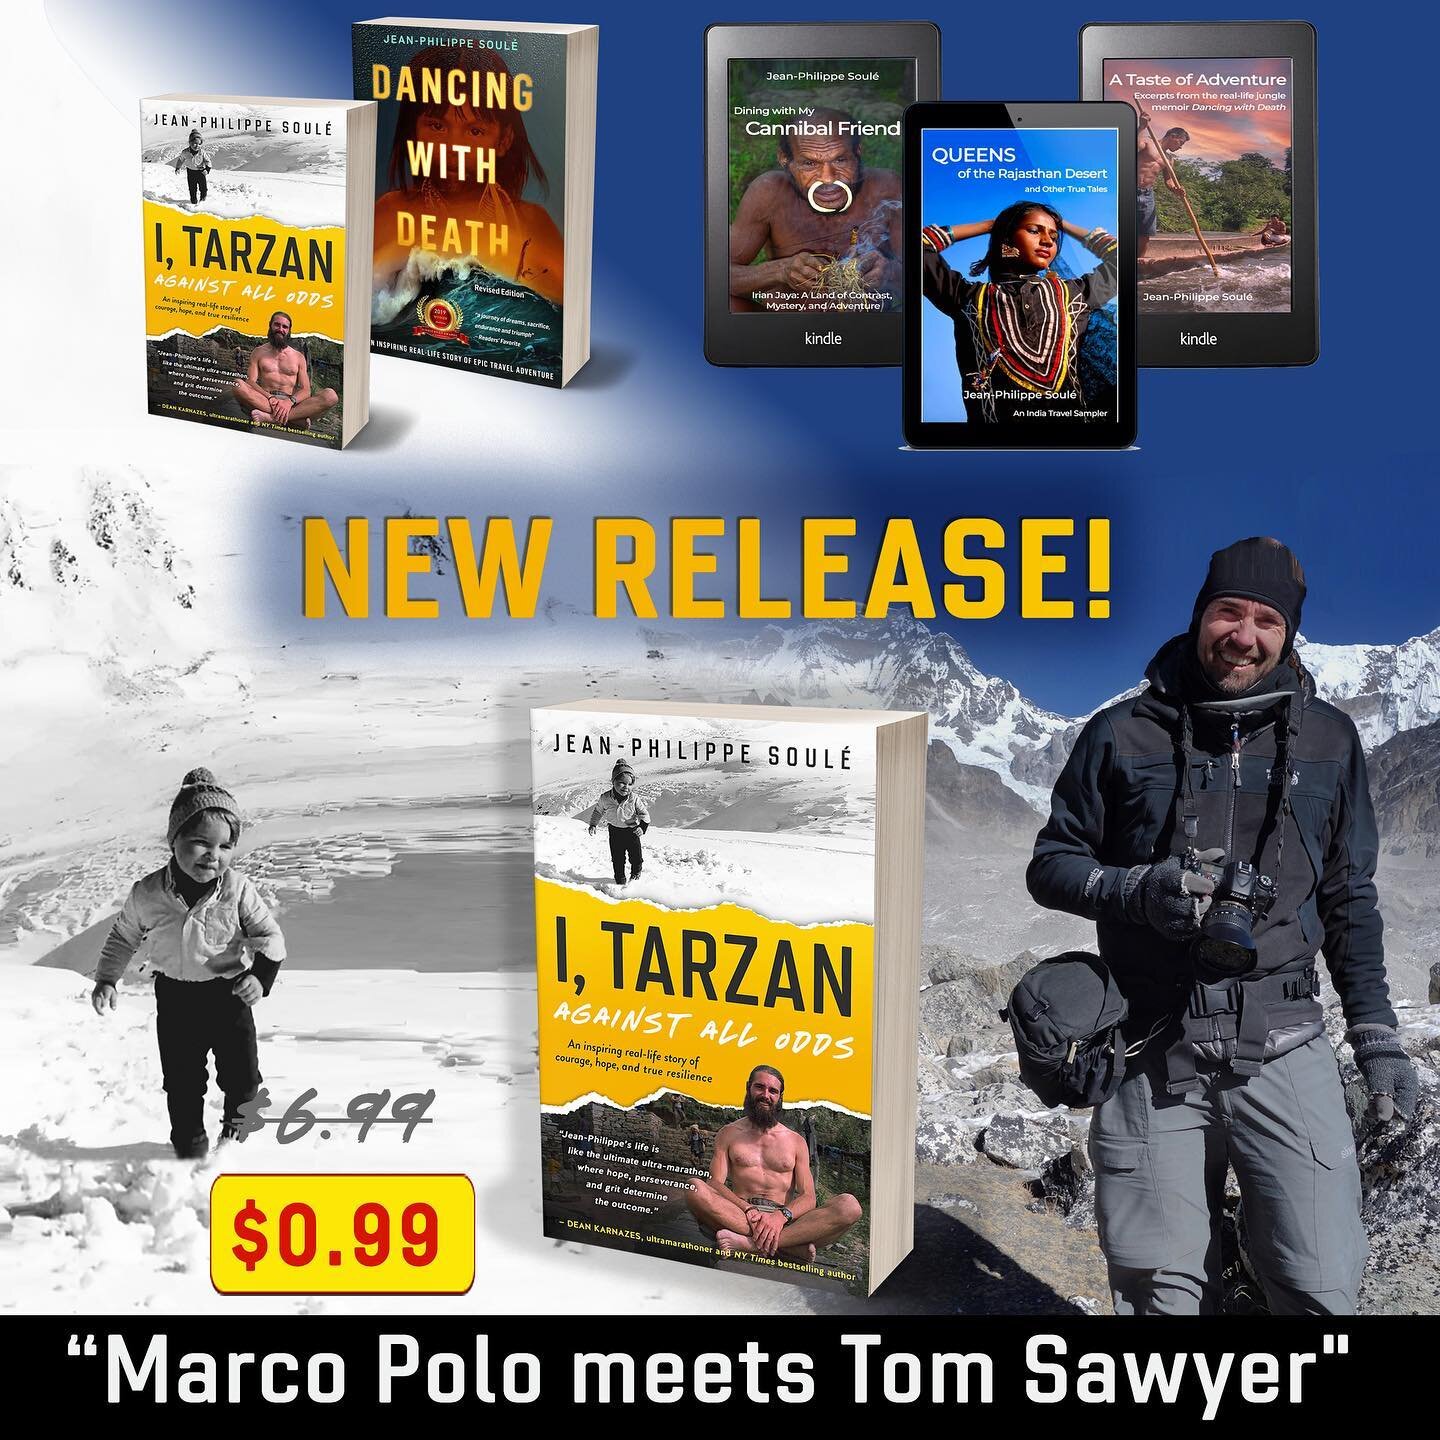 NEW RELEASE!

I, Tarzan is now published as an eBook (and paperback). 
To celebrate this new publication, I&rsquo;m launching it at 99 cents, but only for a few days. 

Raving reviews are already flowing: 

&ldquo;I, Tarzan, simply put, is the